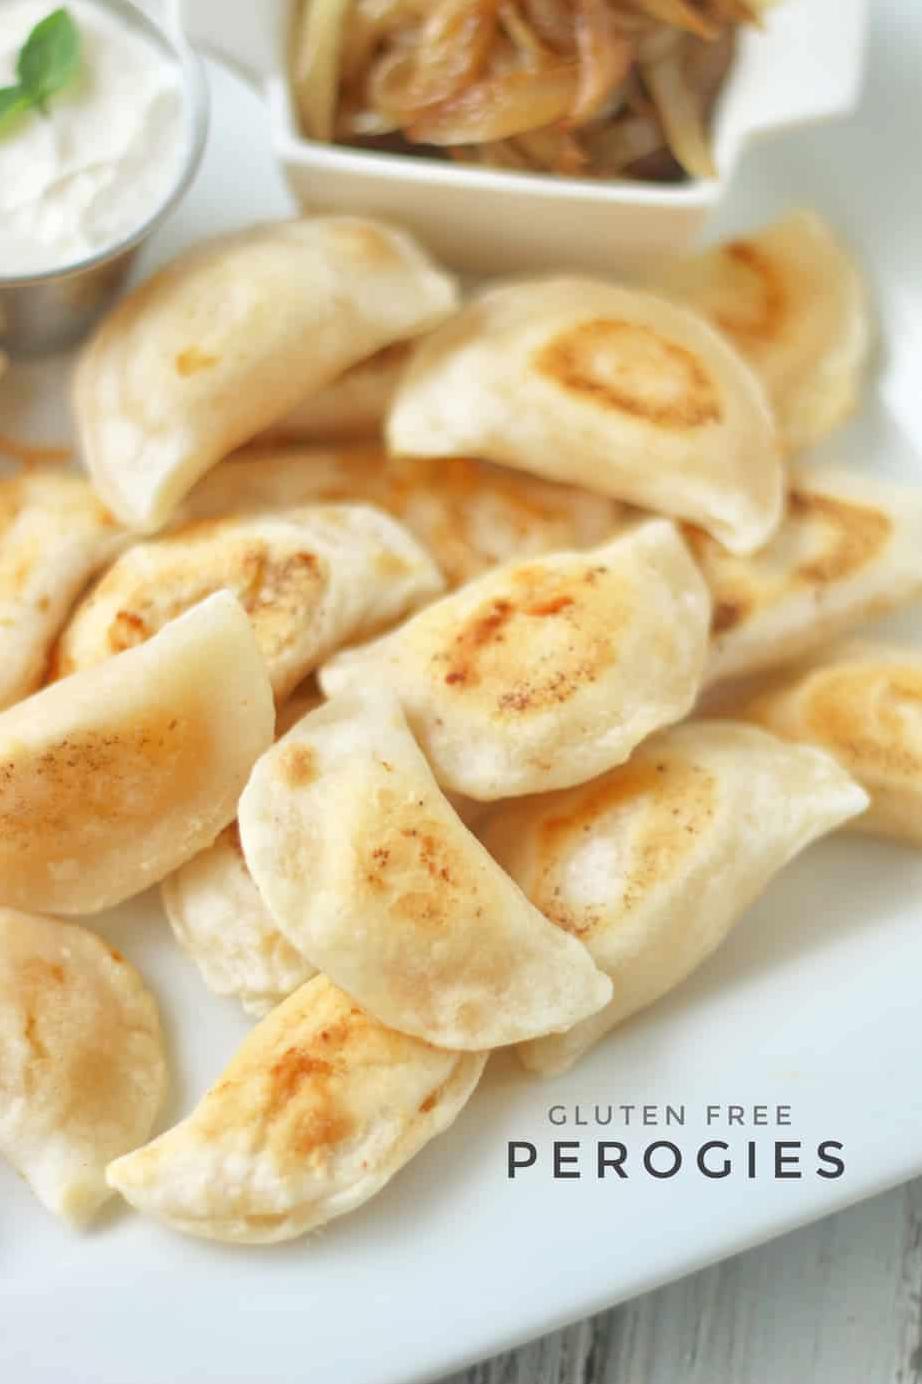  Nothing screams comfort food quite like perogies, and these gluten-free ones are no exception!